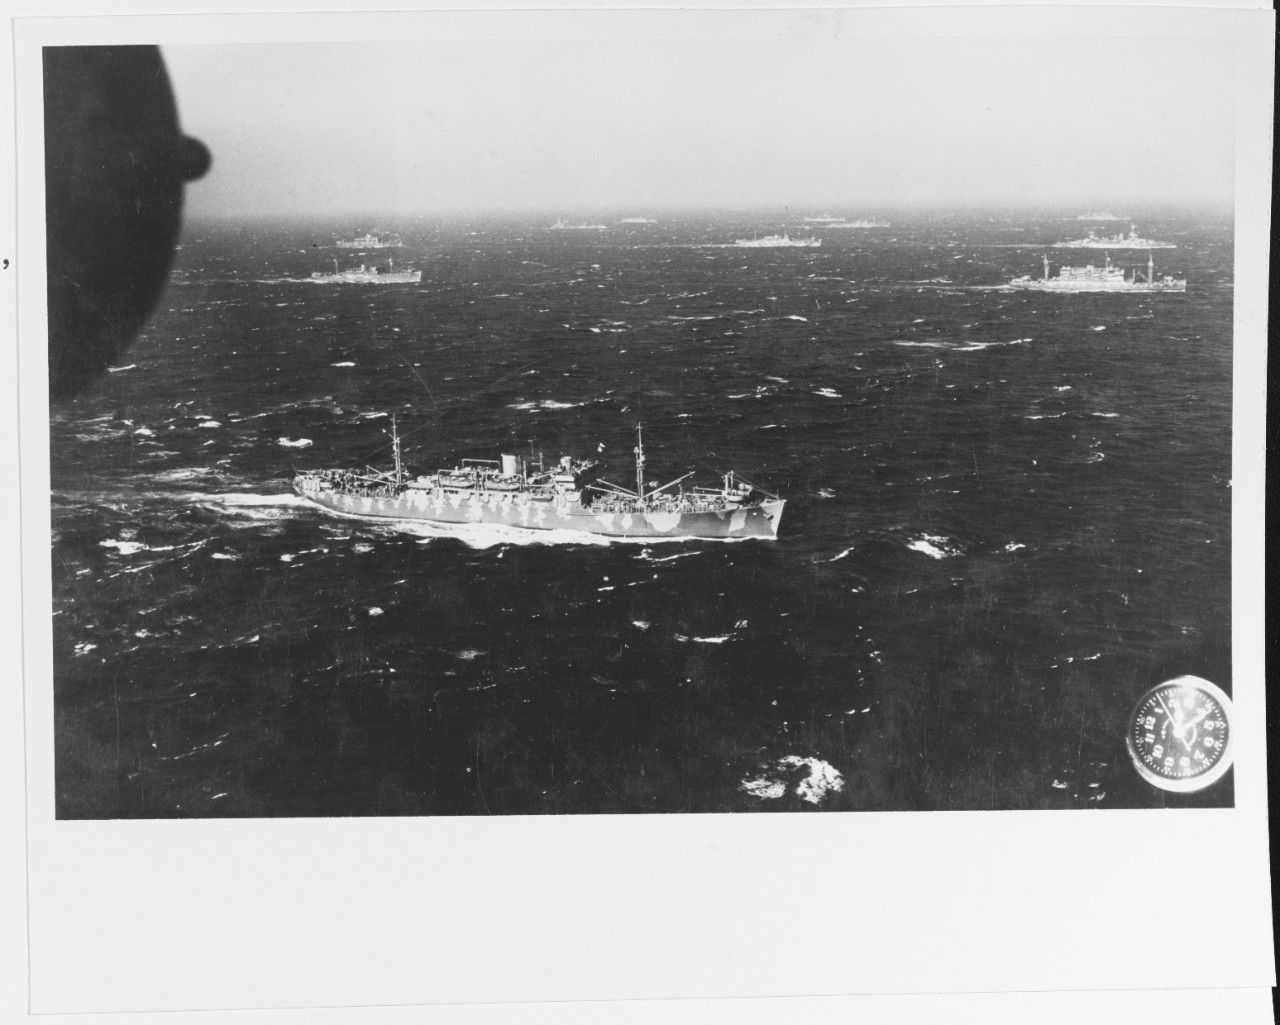 Photo #: 80-G-2411  Convoy out of Brooklyn, New York, February 1942